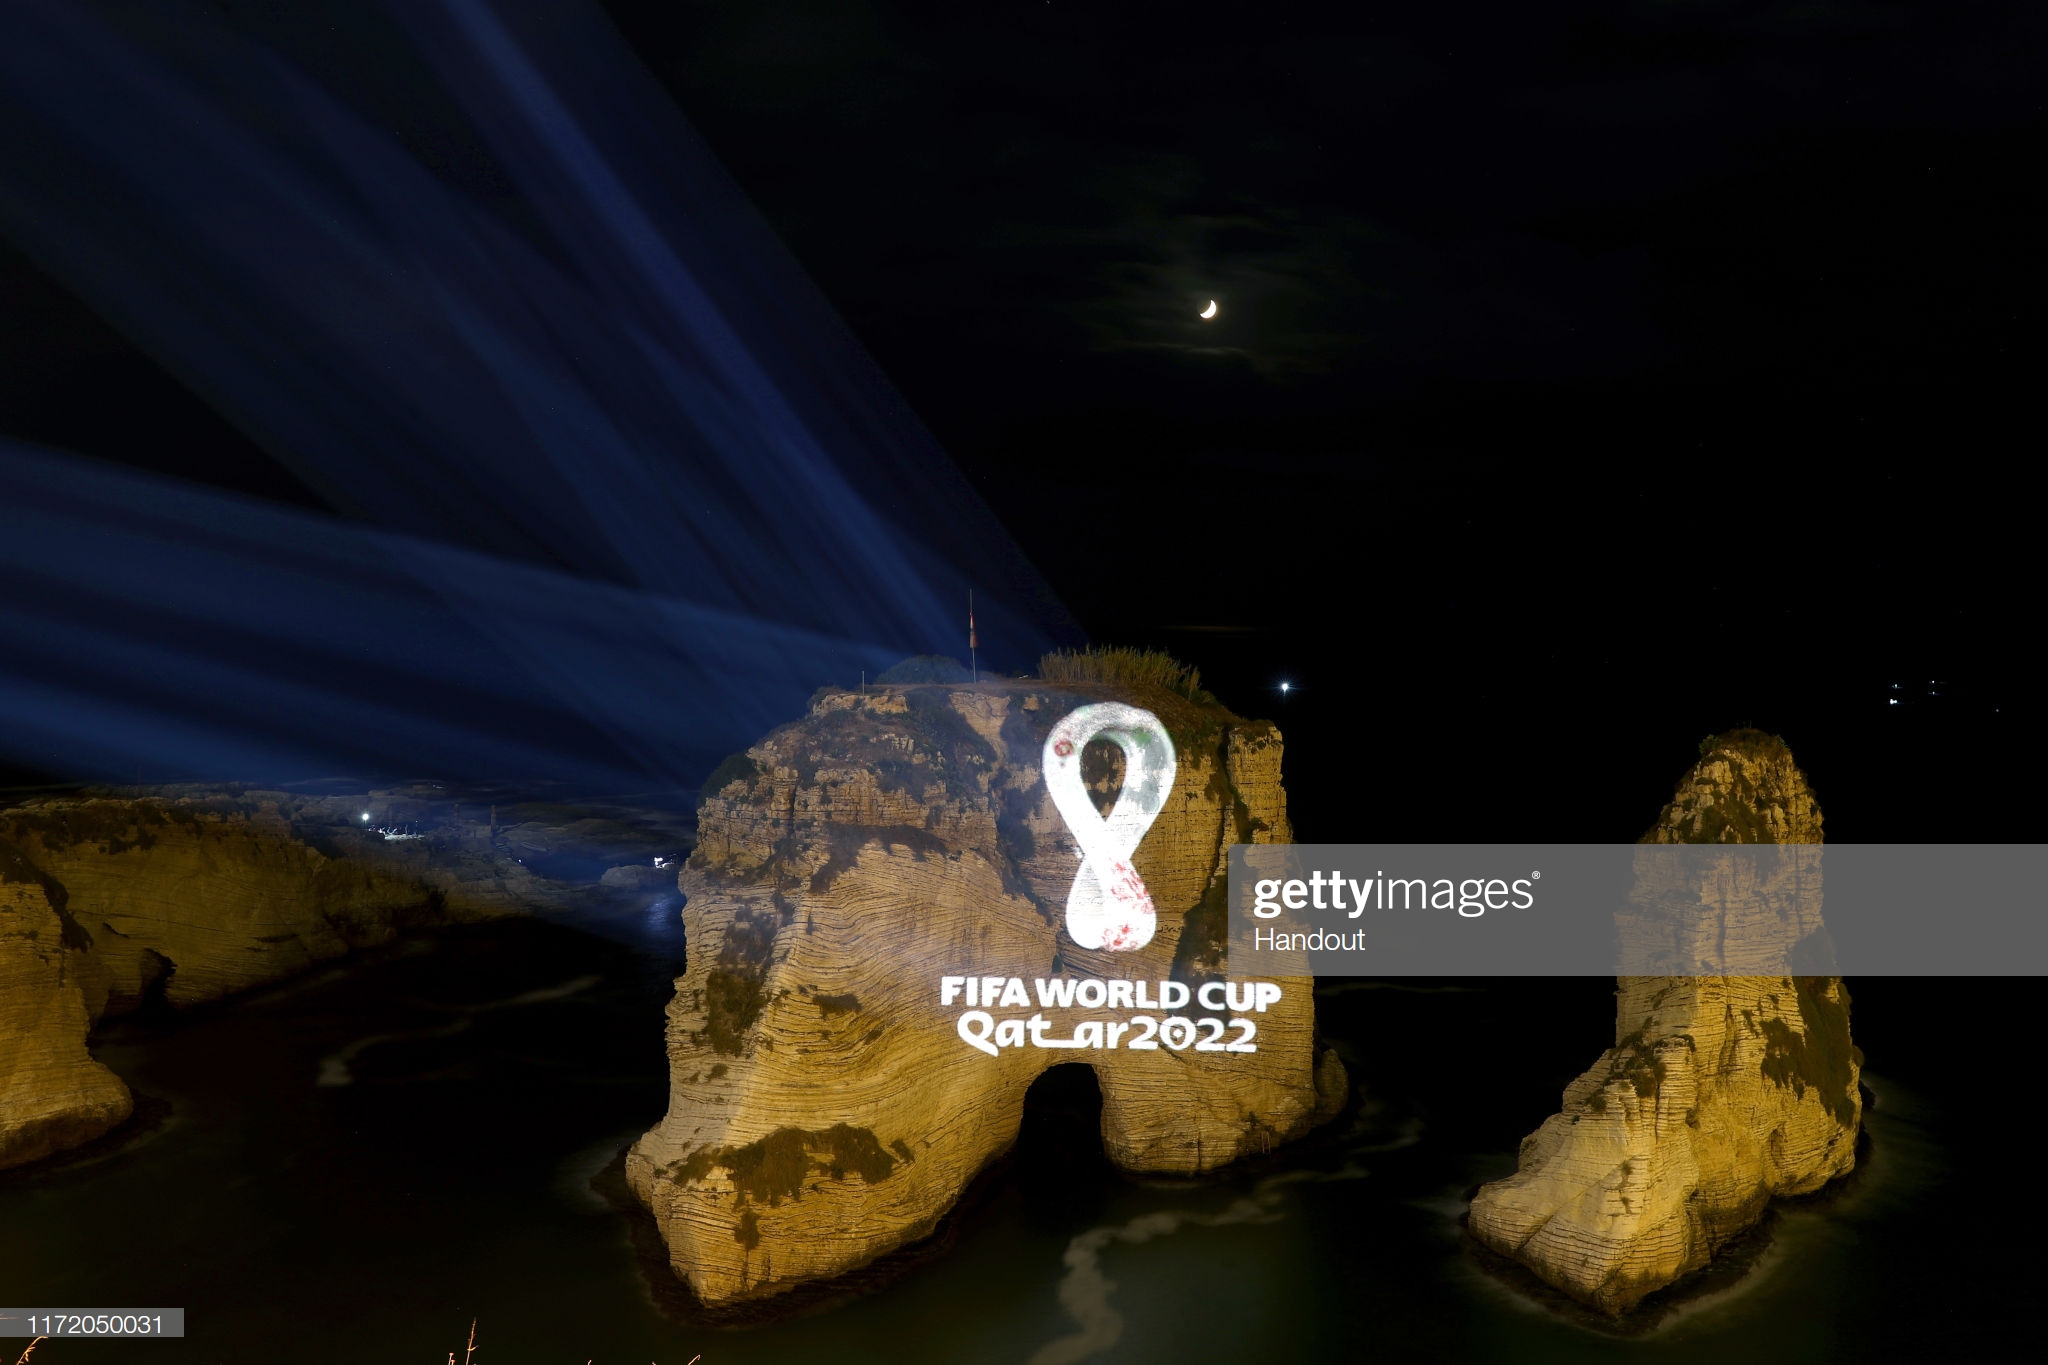 gettyimages-1172050031-2048x2048.jpg